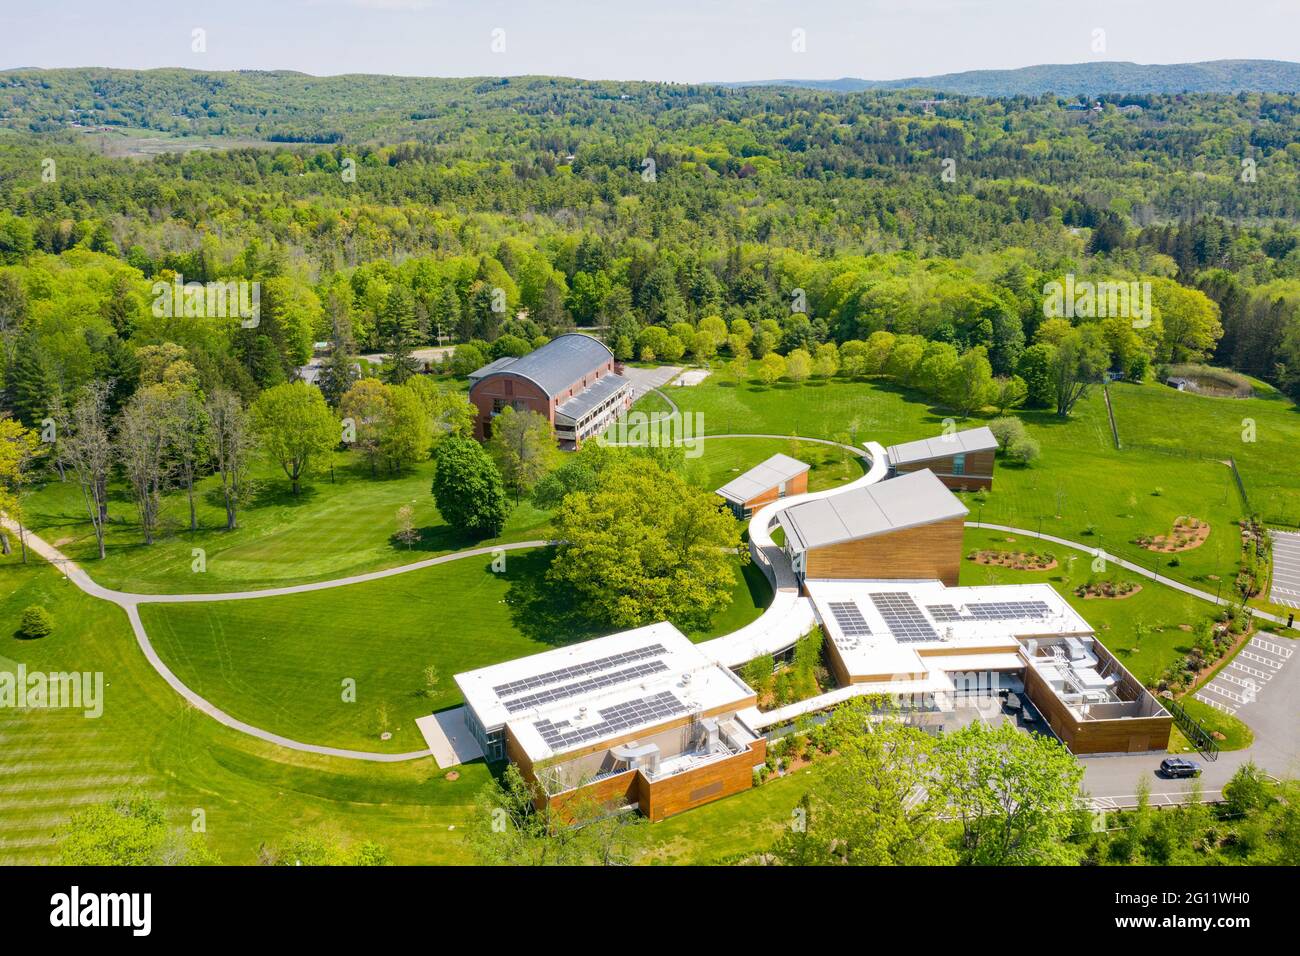 Linde Center for Music and Learning, Tanglewood, Boston Symphony Orchestra, Lenox, Massachusetts Stockfoto